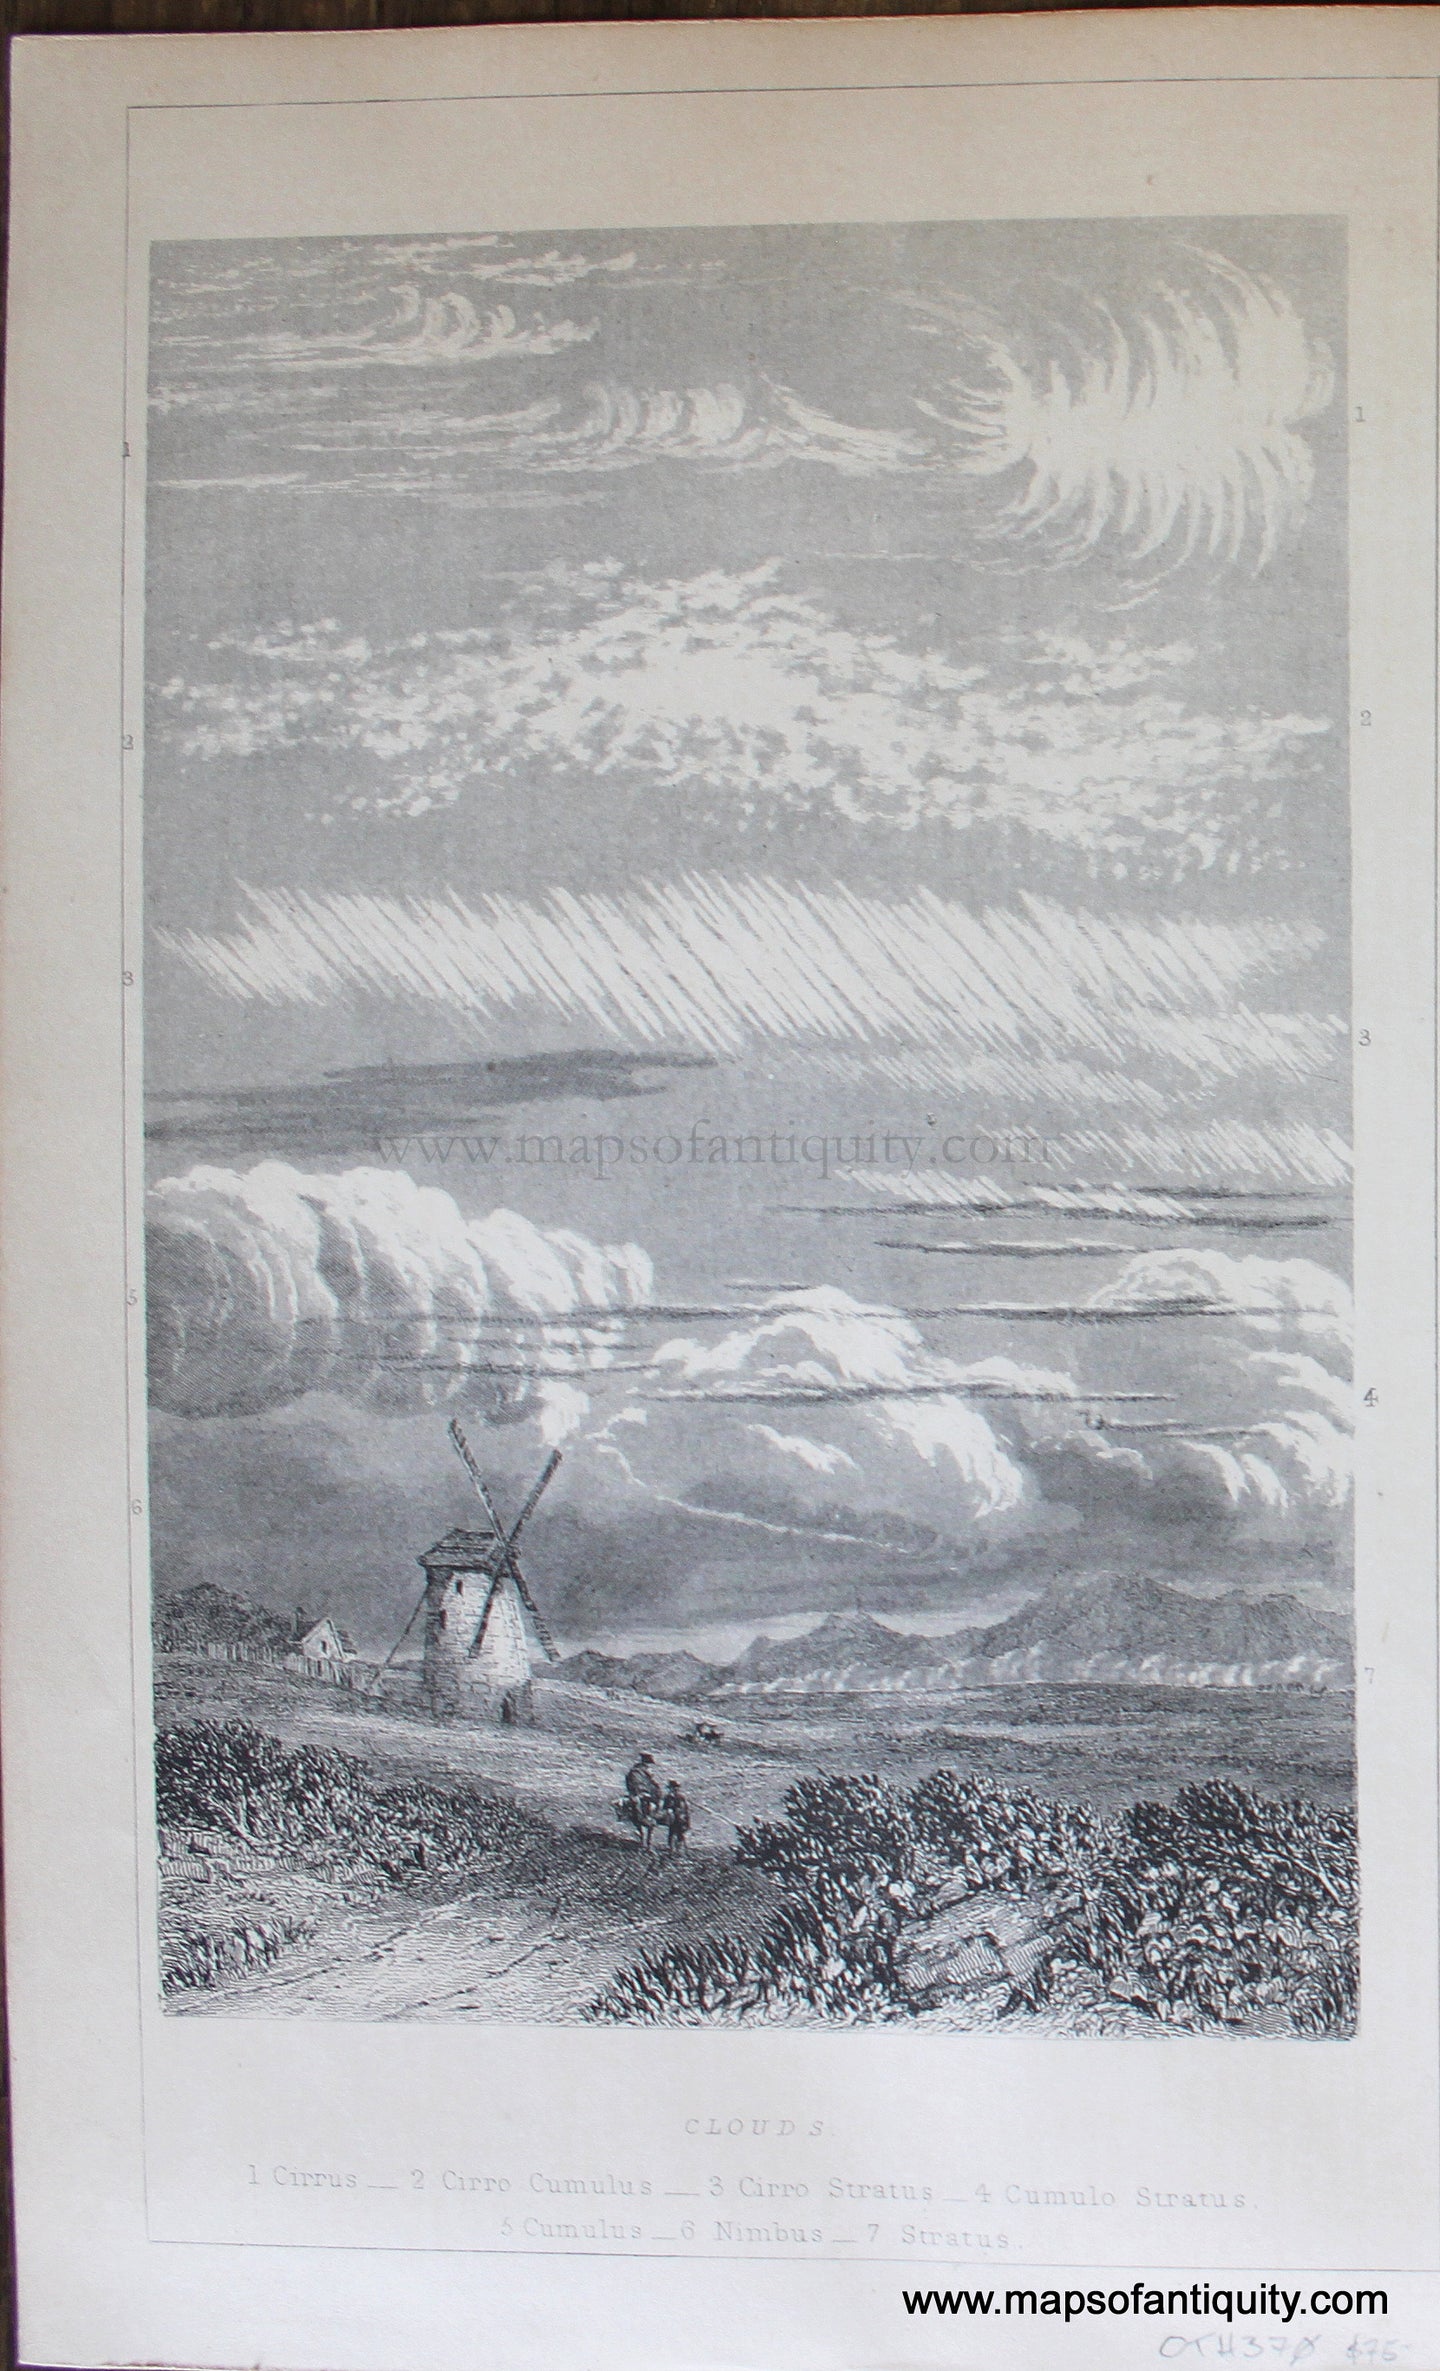 Genuine-Antique-Print-Clouds-Other--1850-Petermann-/-Orr-/-Dower-Maps-Of-Antiquity-1800s-19th-century